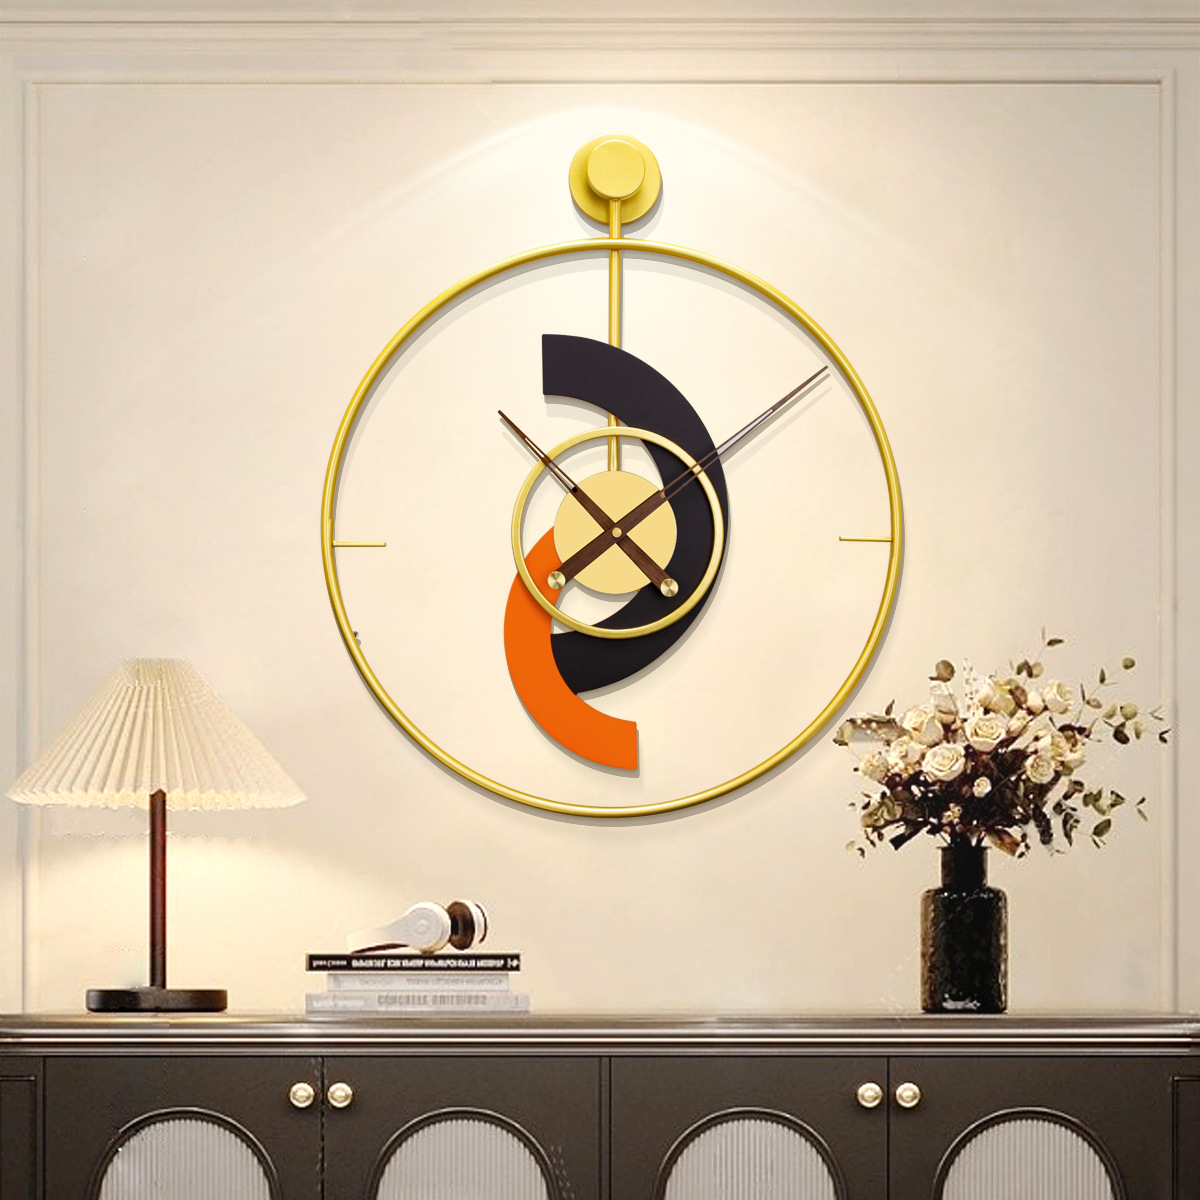 Modern Minimalist Metal Wall Clock Battery Powered Noiseless Clock Suitable for Home Decoration Office Living Room Bedroom